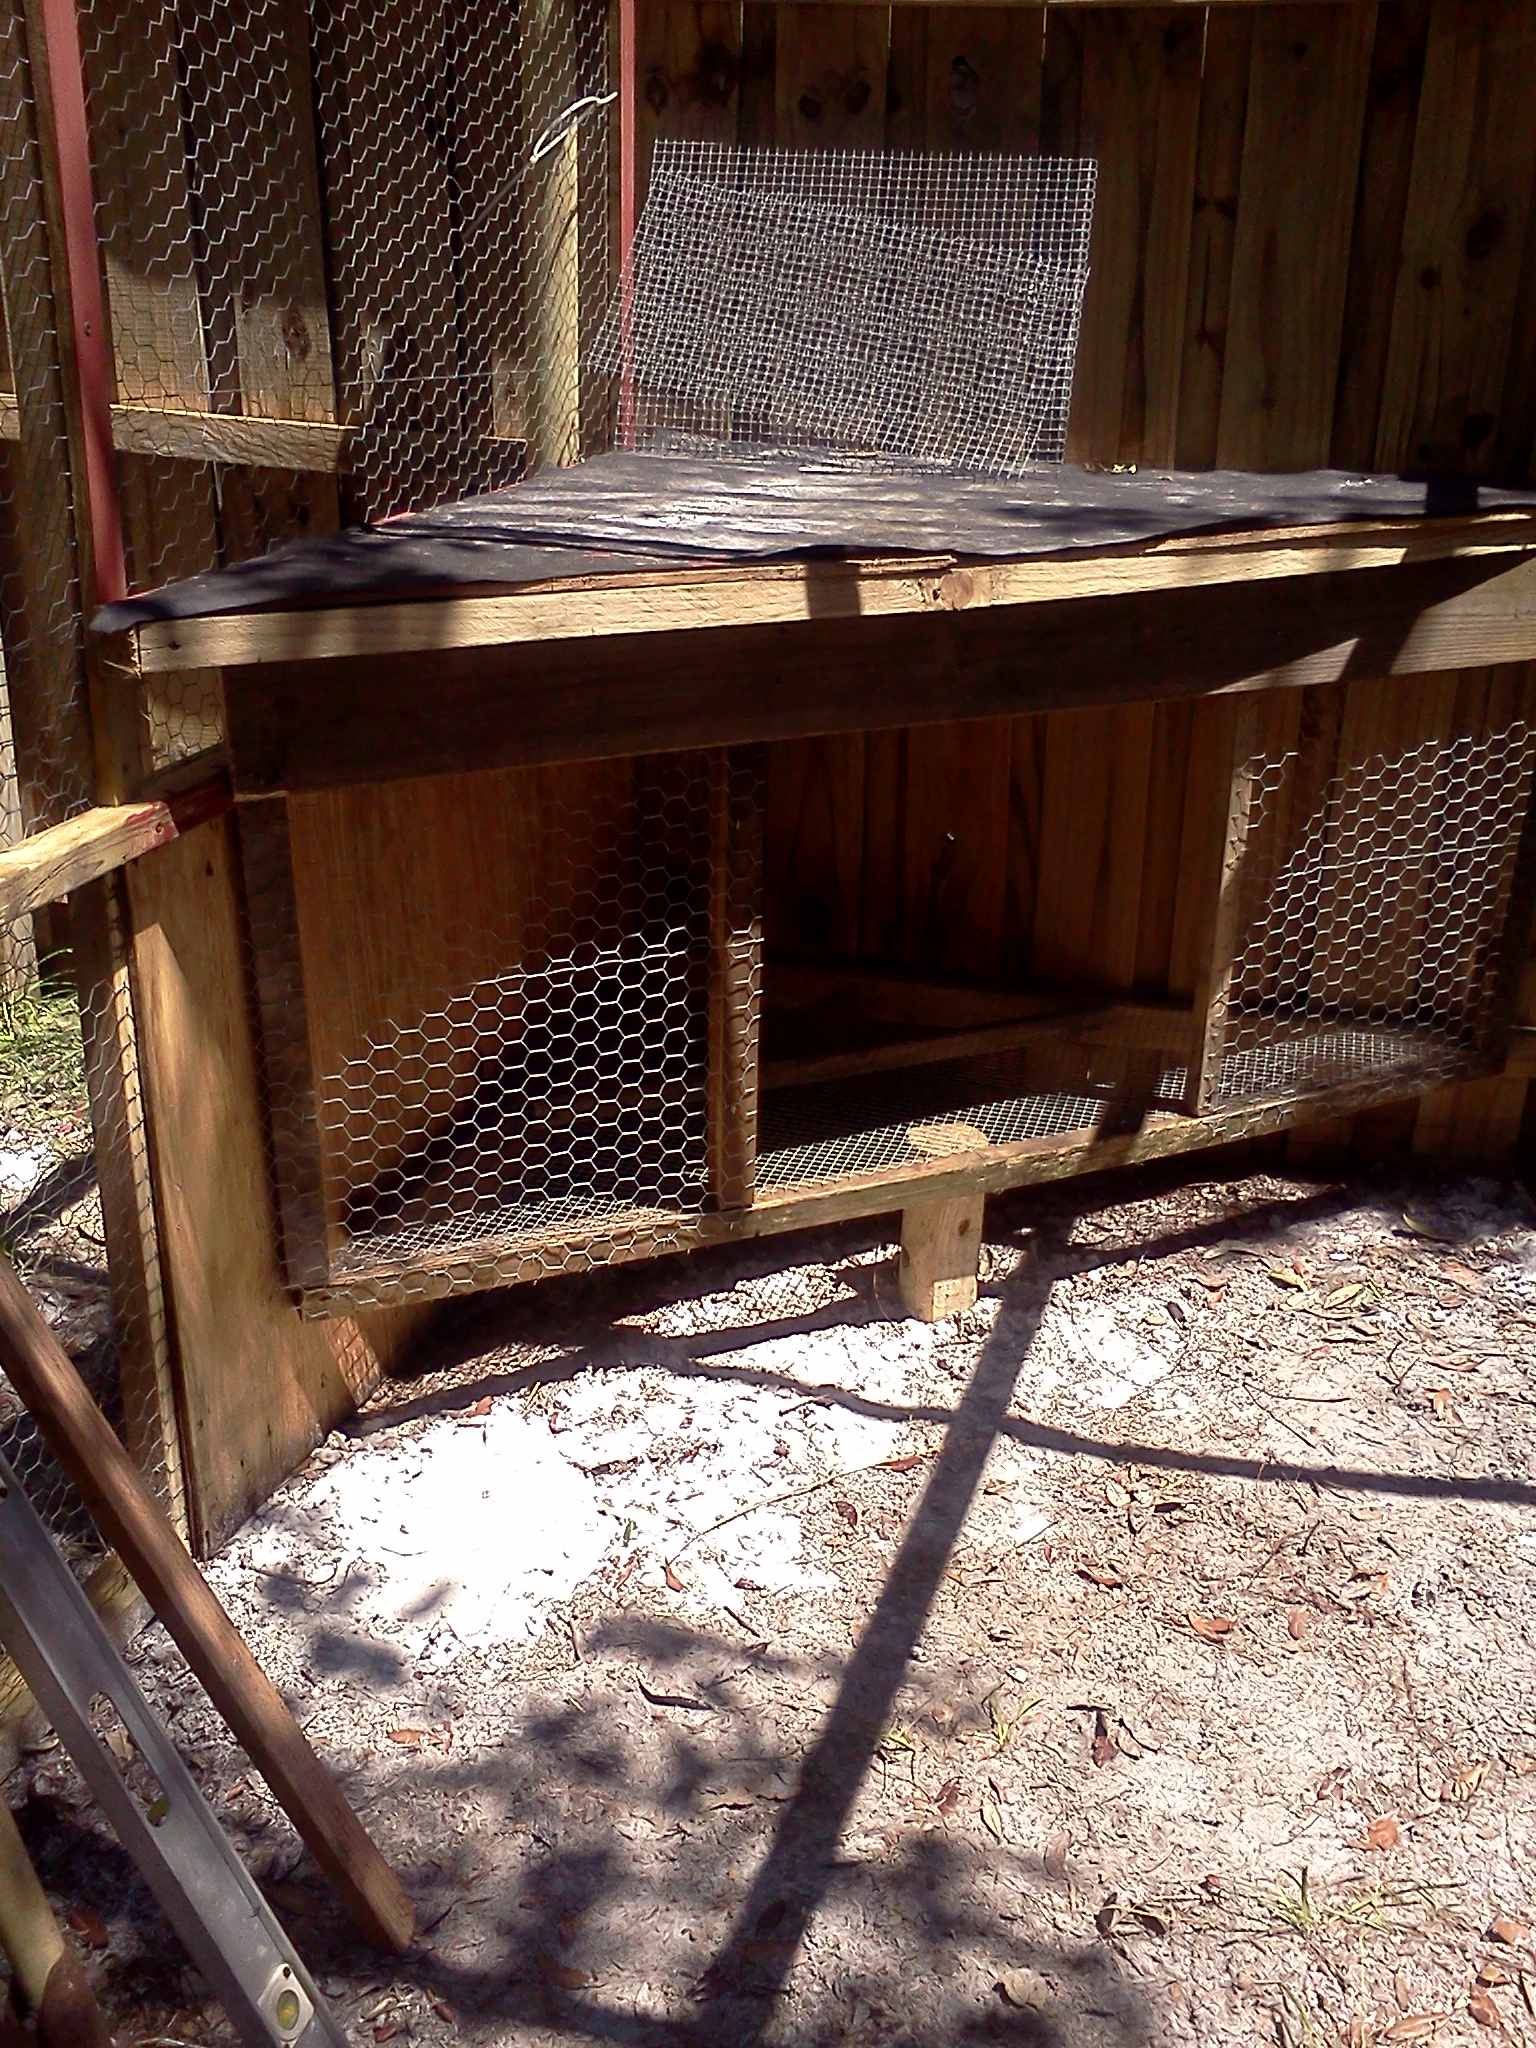 Day hutch in corner of Chicken Run. Nice cool and dry place for the girls to hang out when the suns straight up.